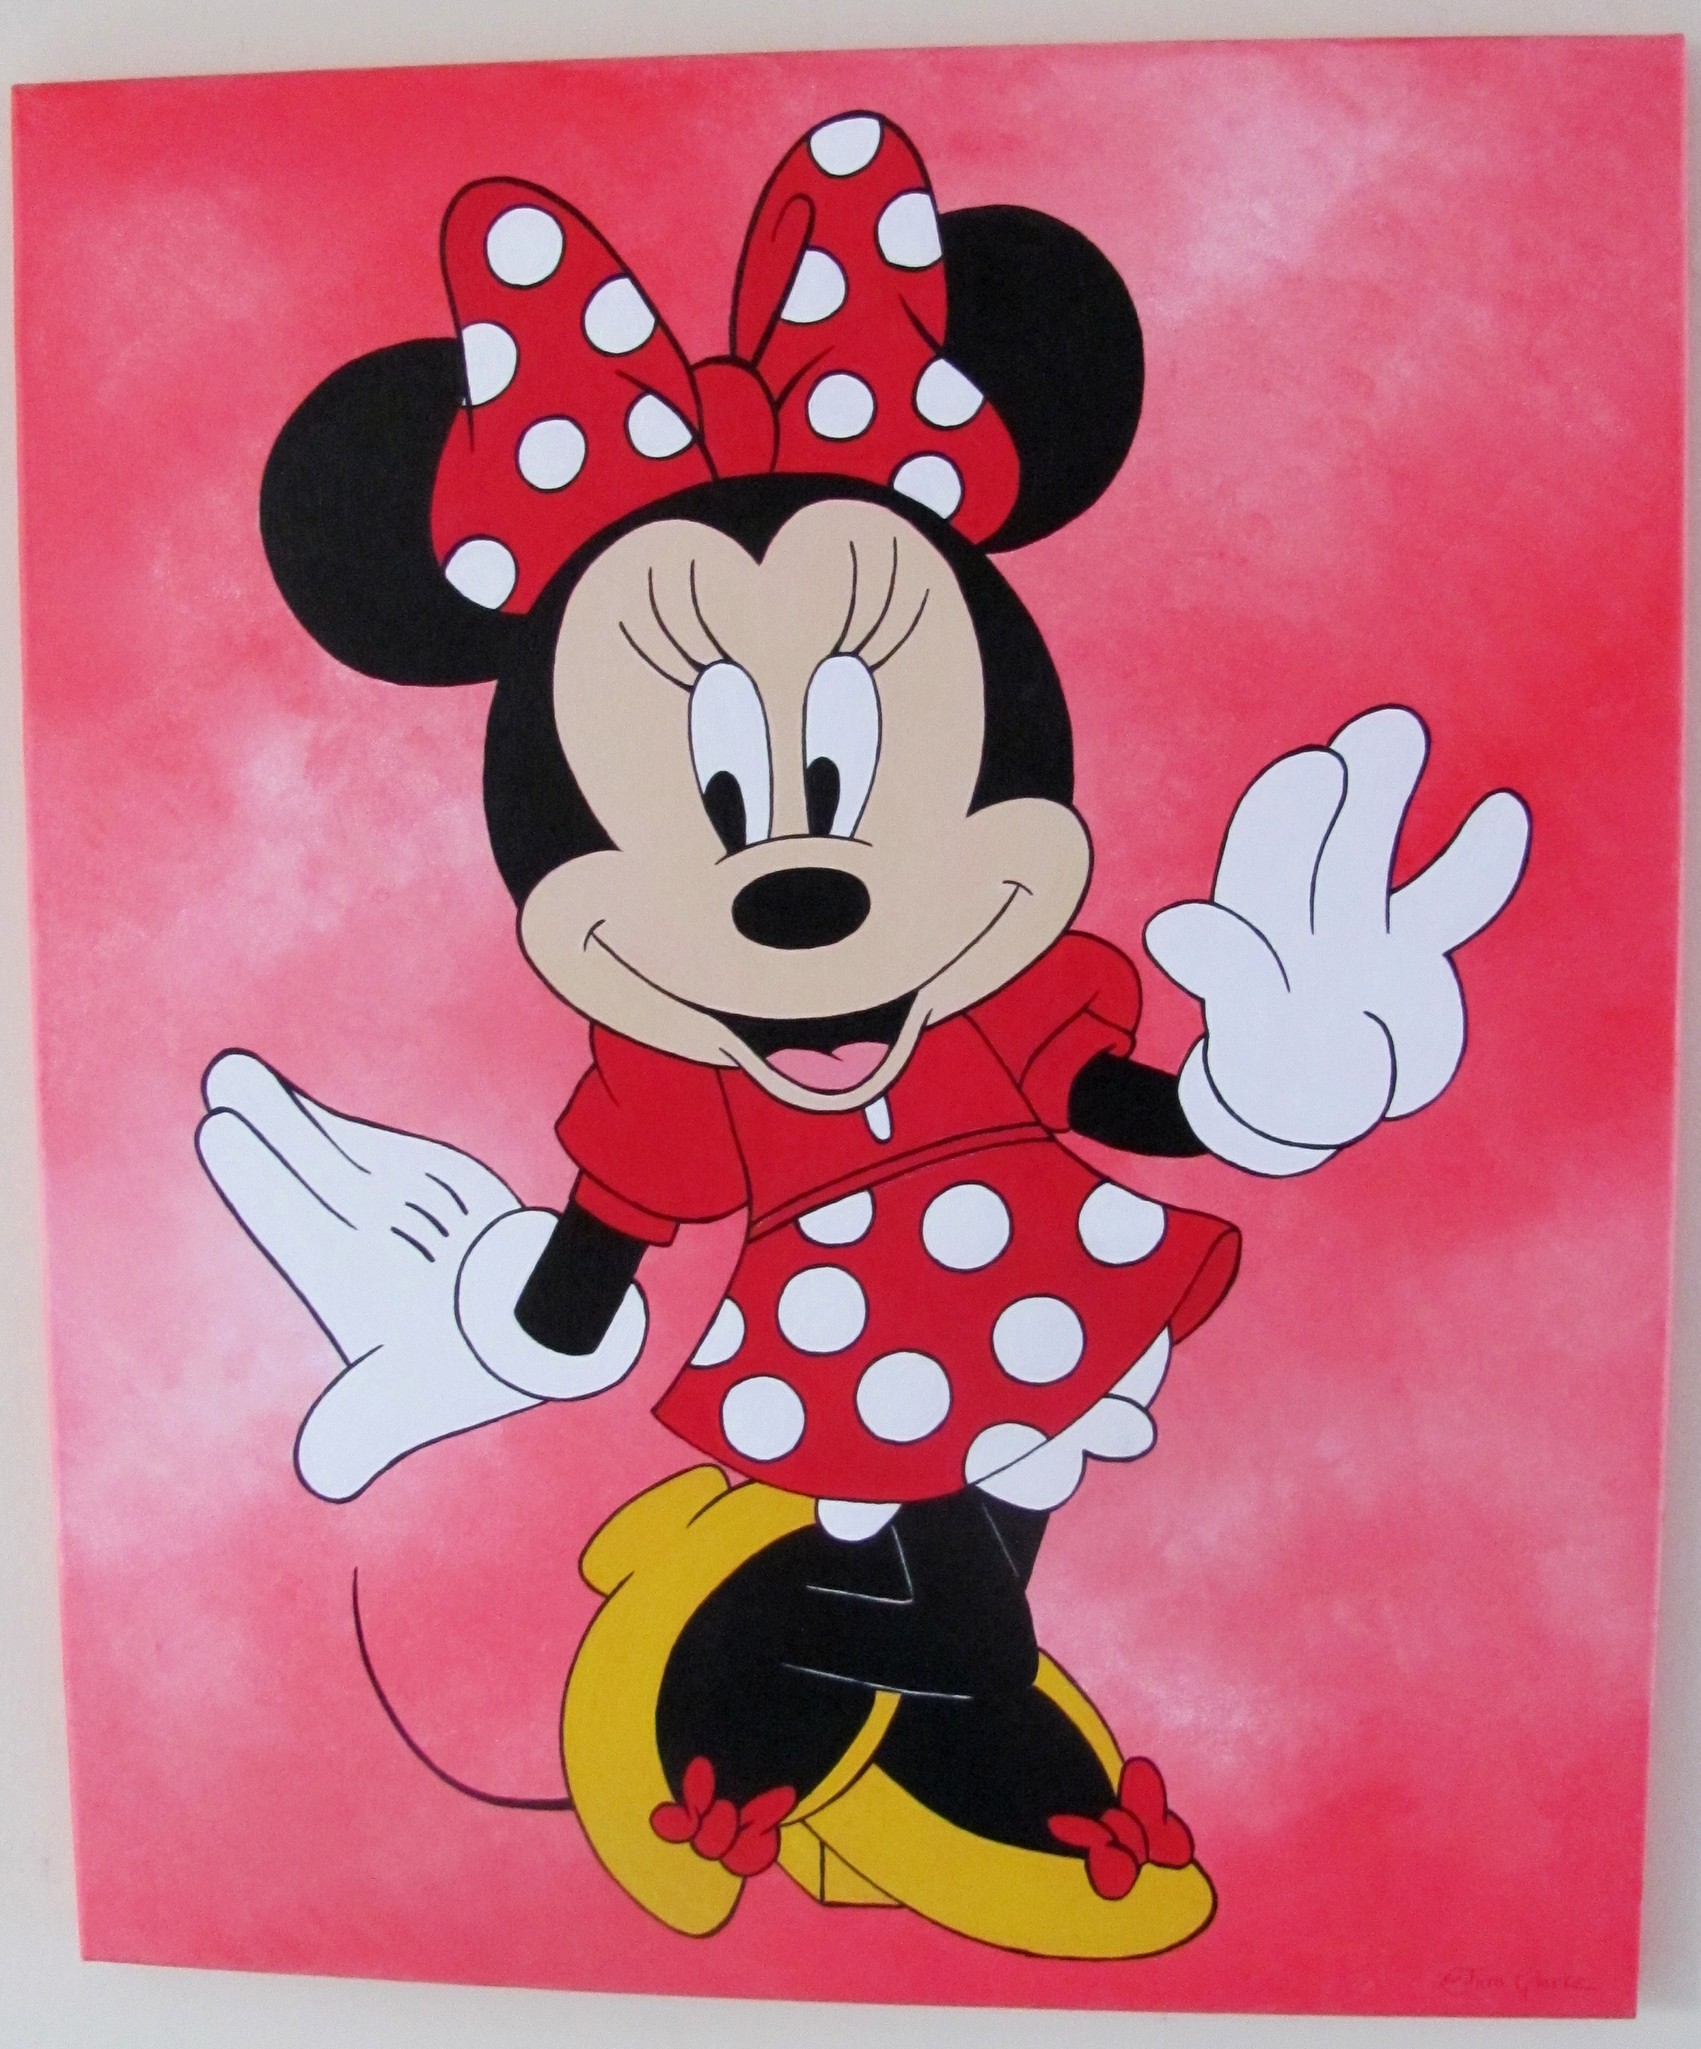 1701x2049 Minnie Mouse Wallpaper - http://wallpaperzoo.com/minnie-mouse-